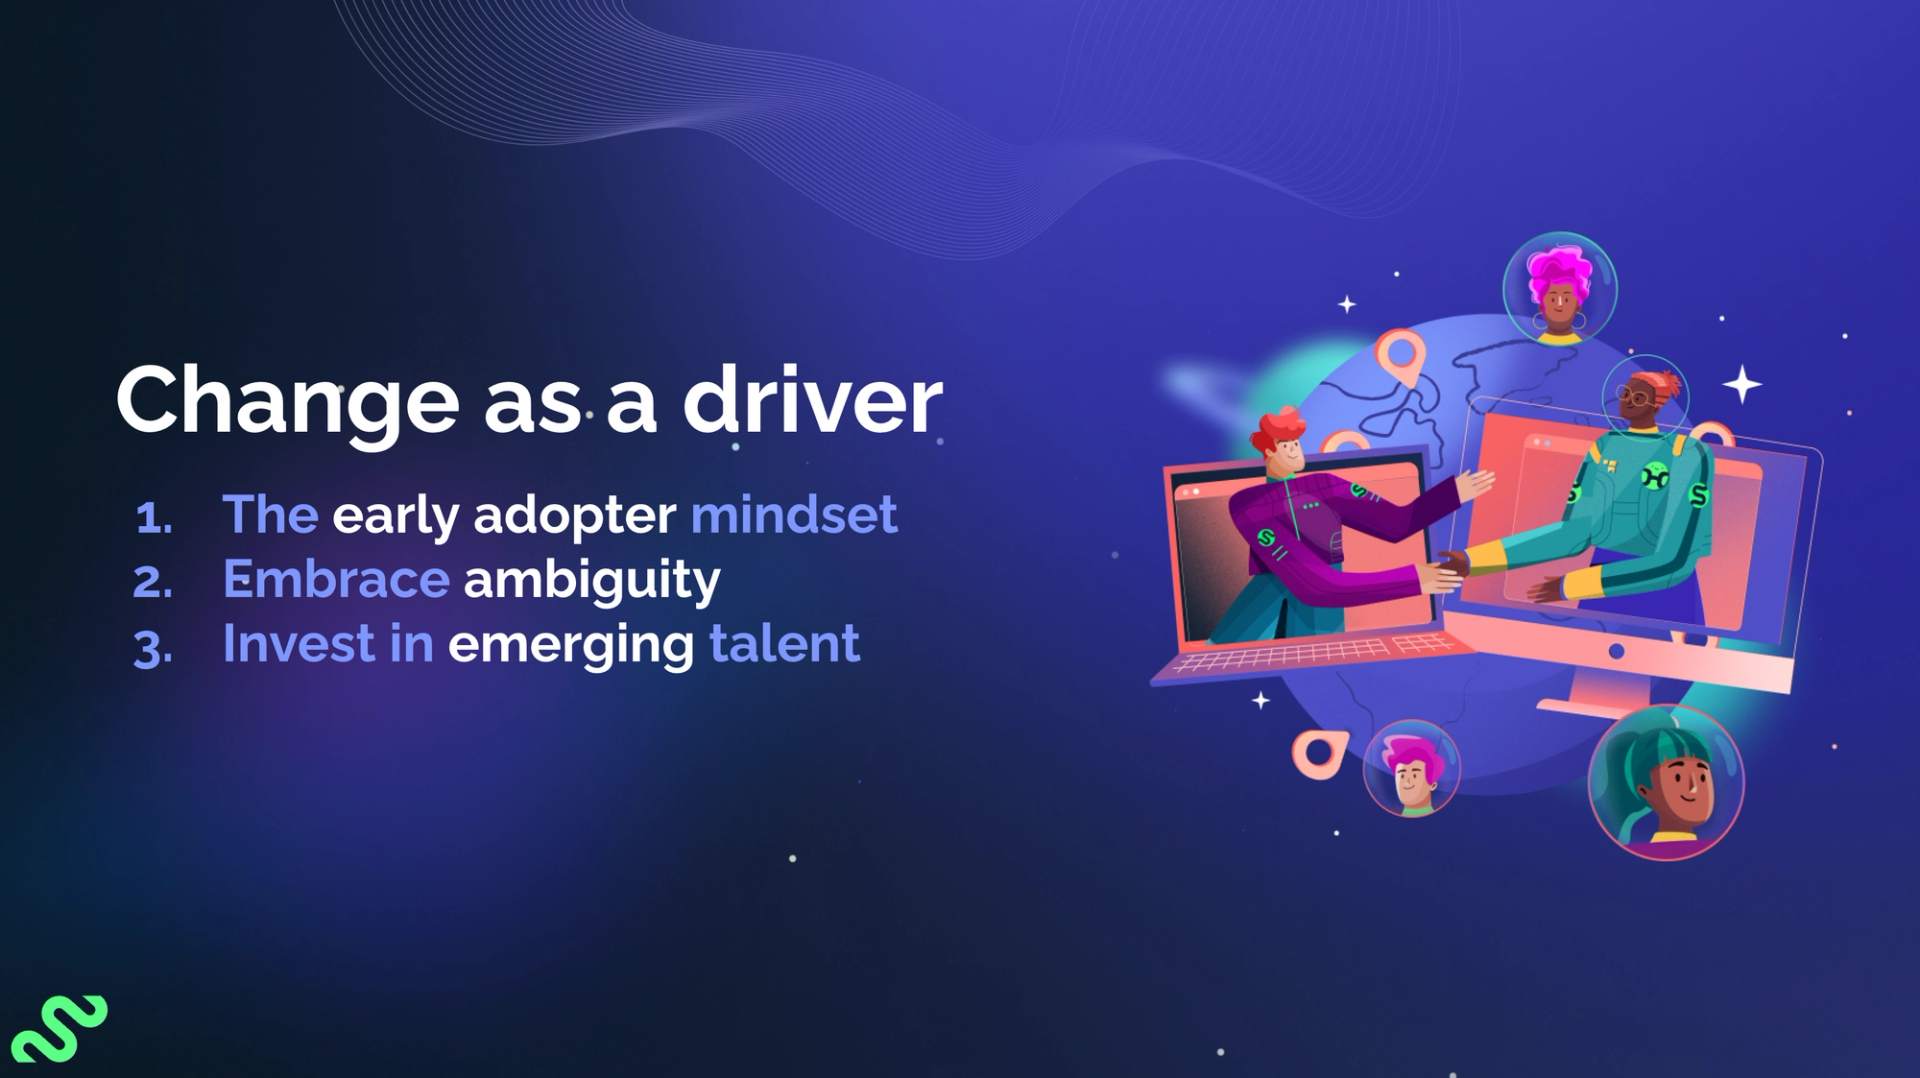 Change as a driver. The early adopter mindset. Embrace ambiguity. Invest in emerging talent.